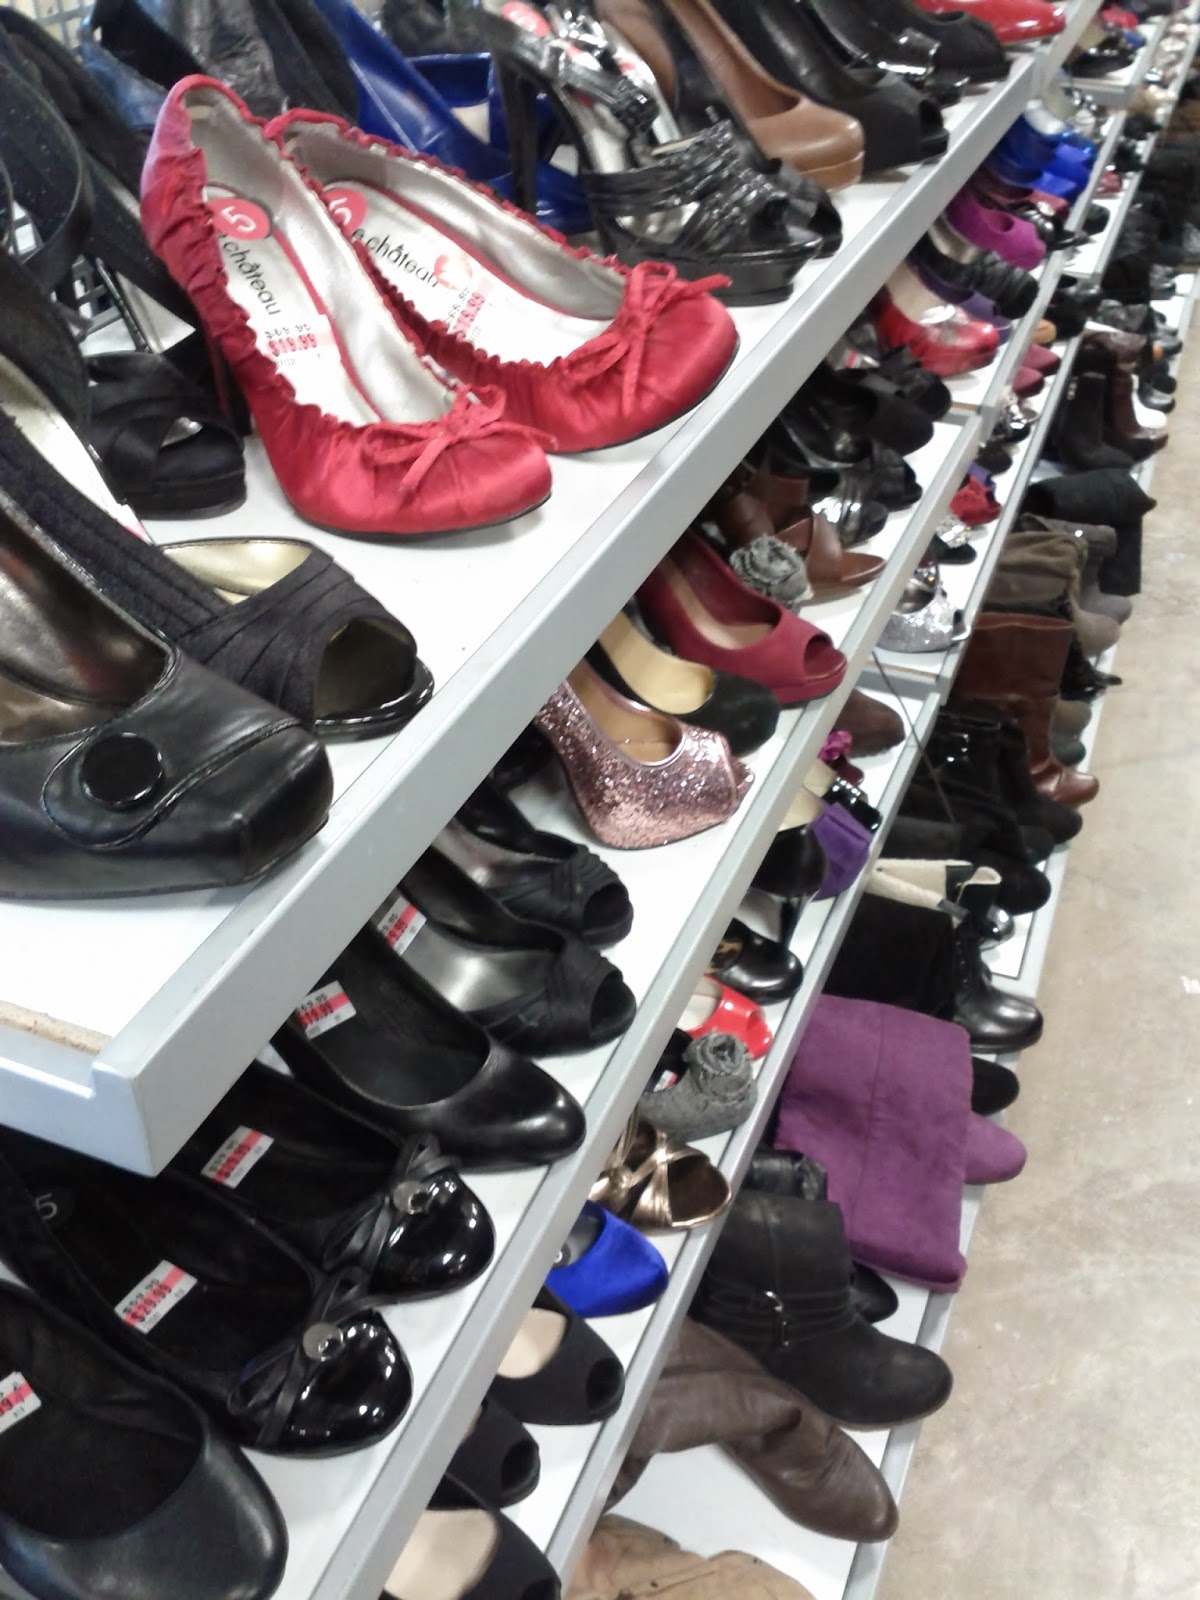 Toronto things: Le Chateau Orfus Road pictures of shoes and clothing